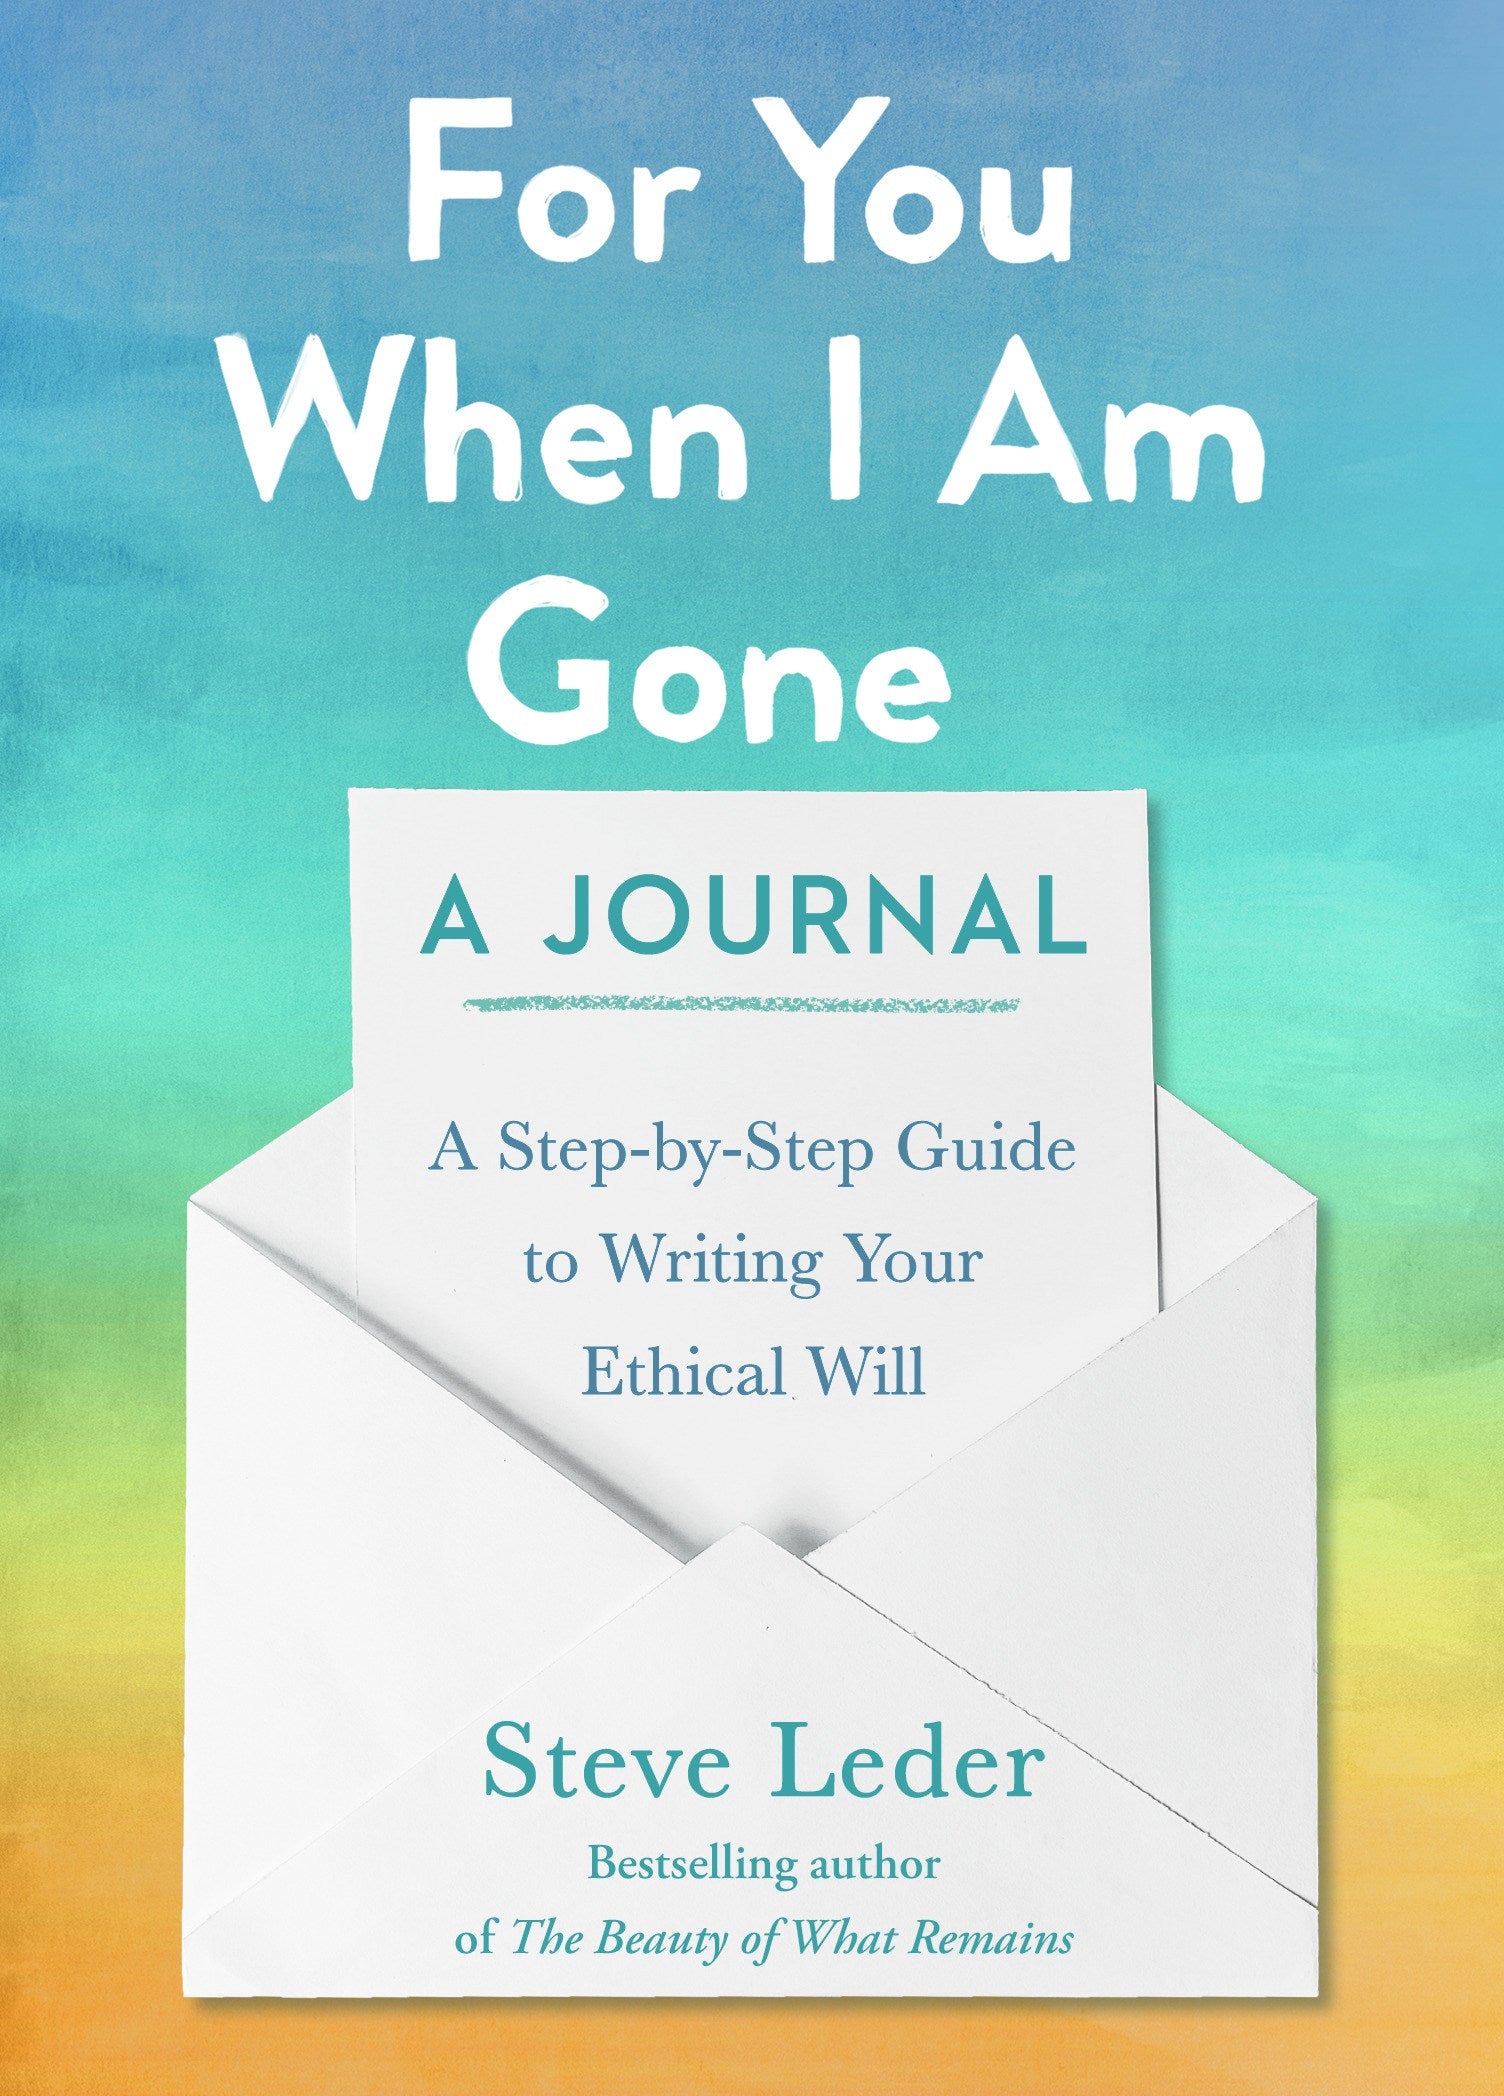 For You When I Am Gone: A Journal : A Step-by-Step Guide to Writing Your Ethical Will